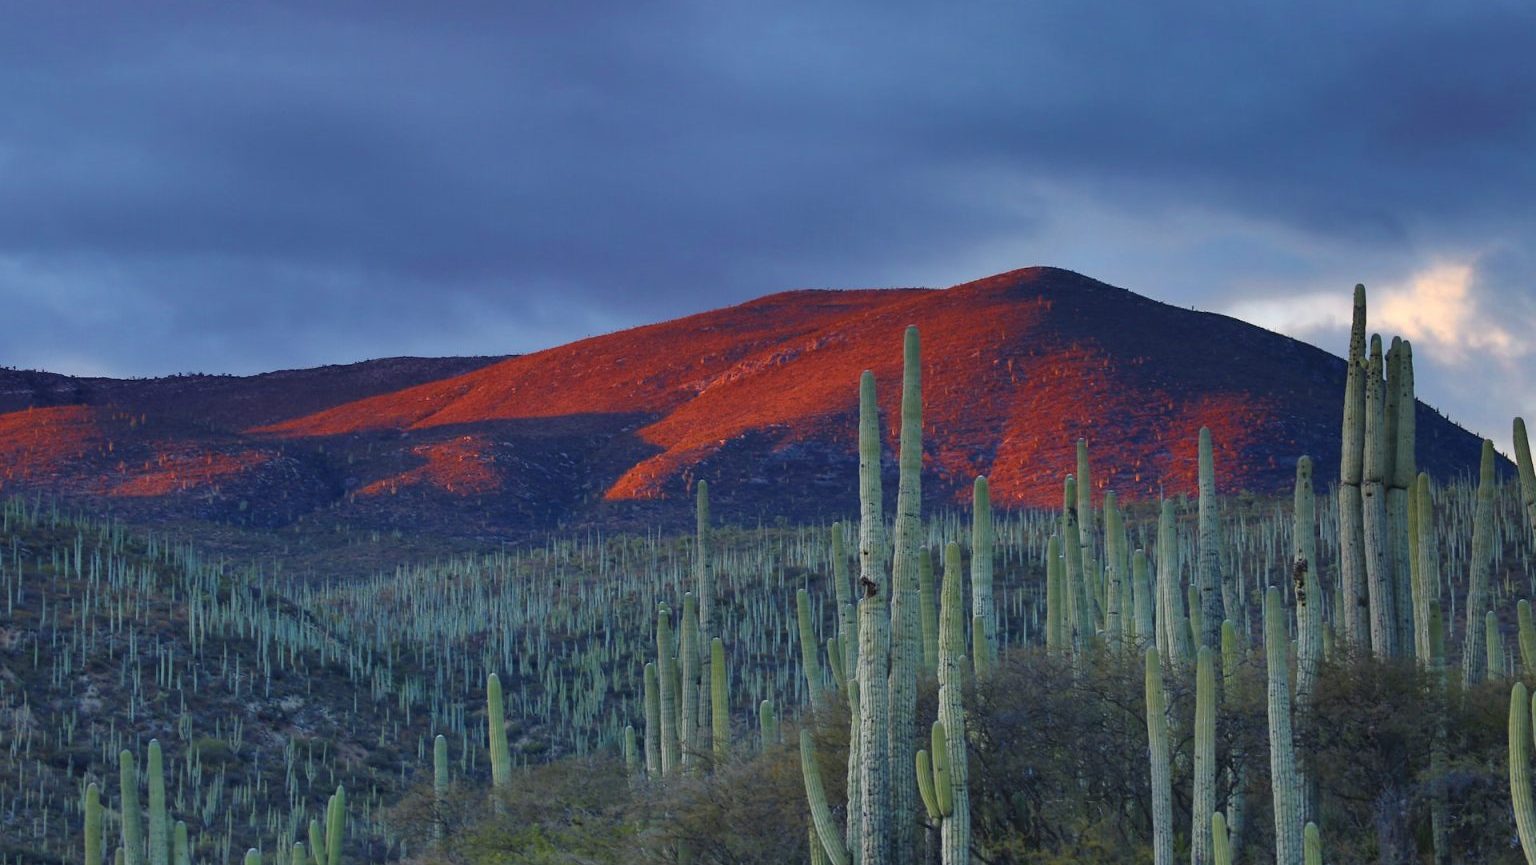 A mountain with saguaro cactus in the background.